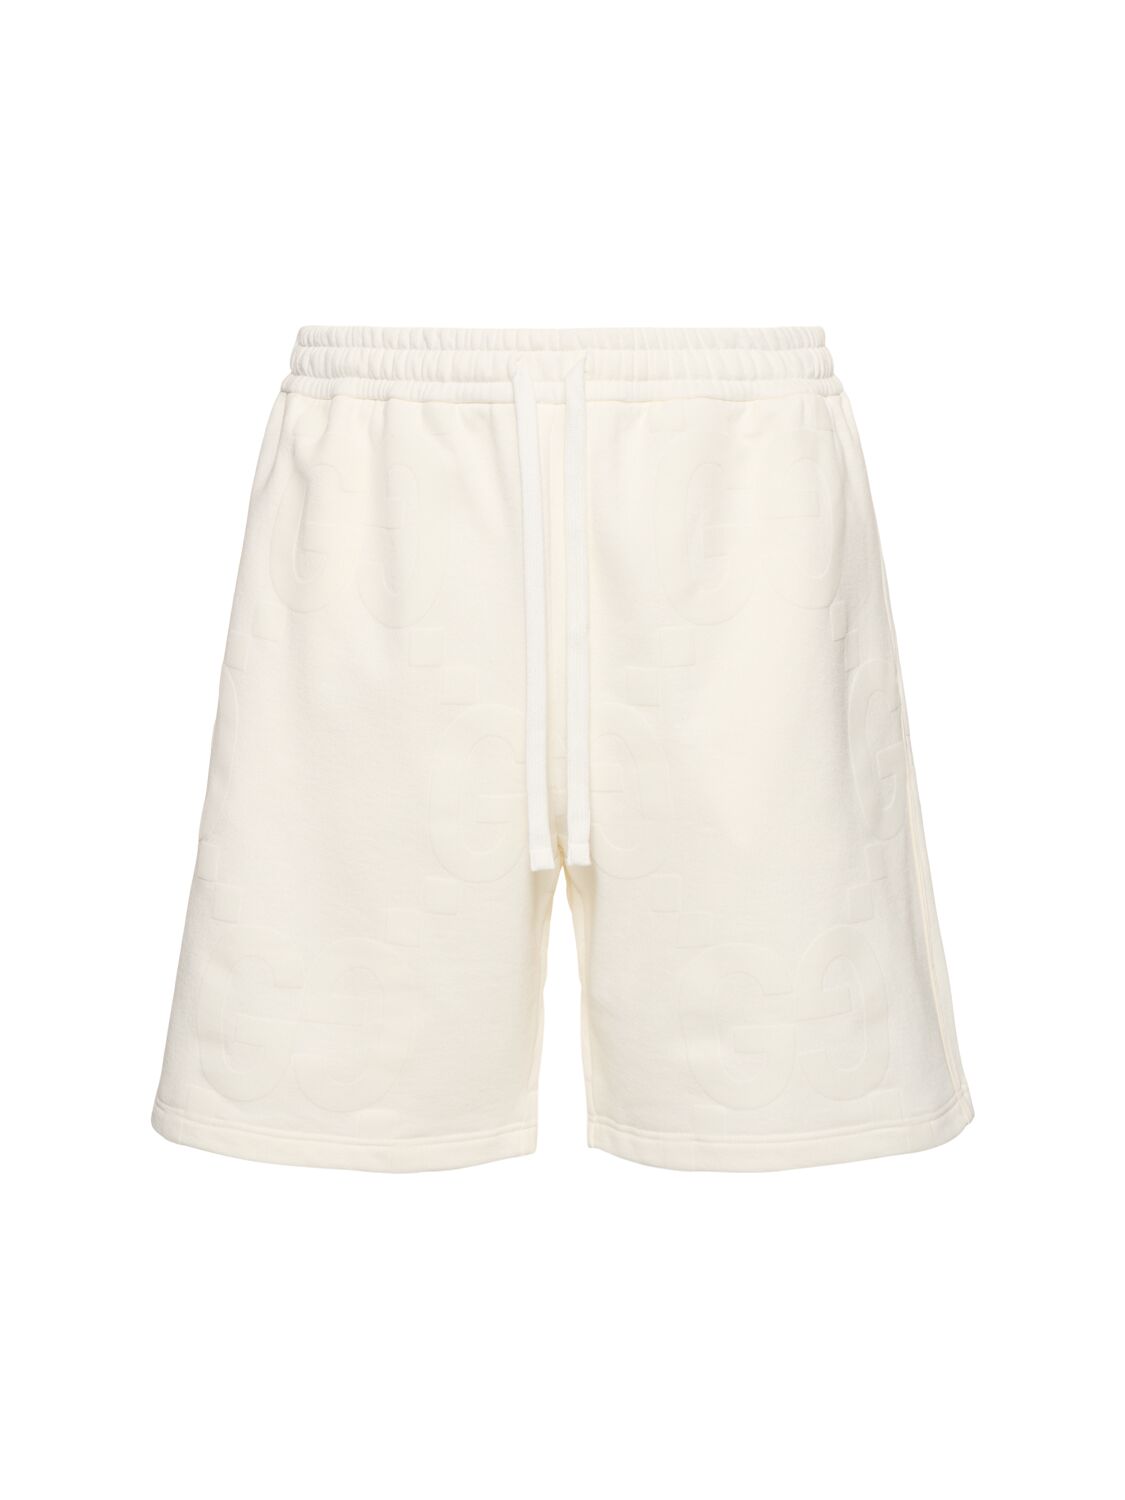 Image of Light Felted Cotton Jersey Shorts